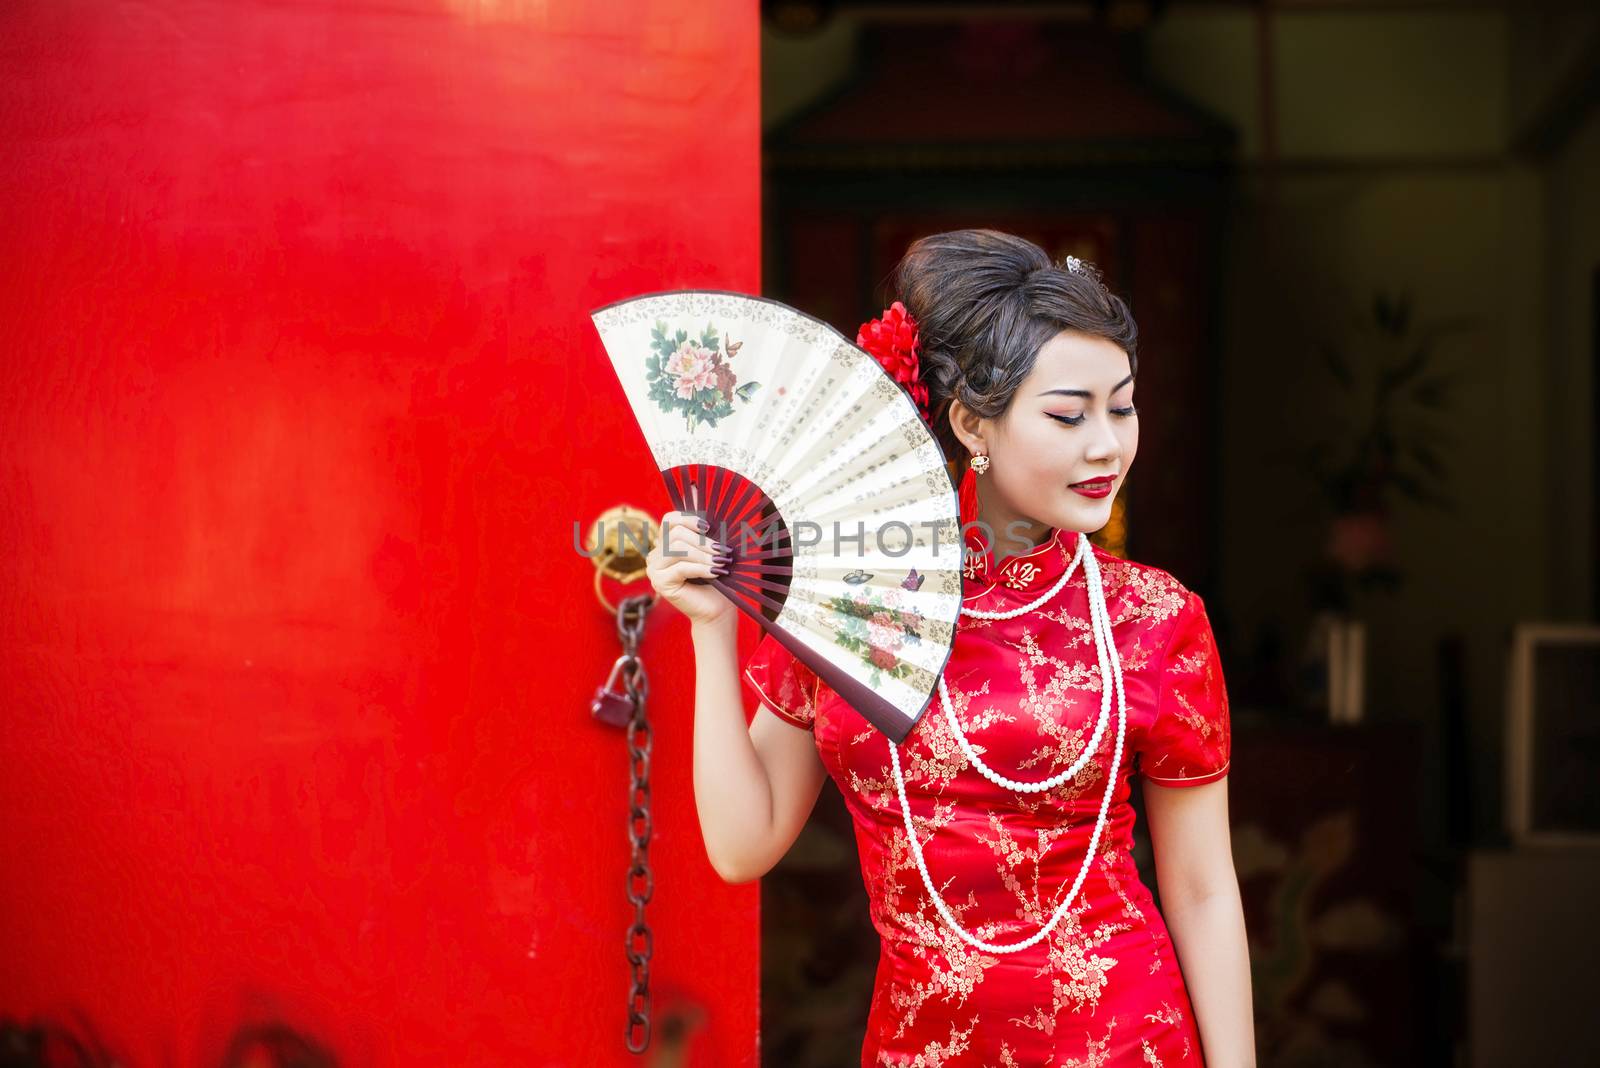 Chinese woman red dress traditional cheongsam ,close up portrait with red wood door